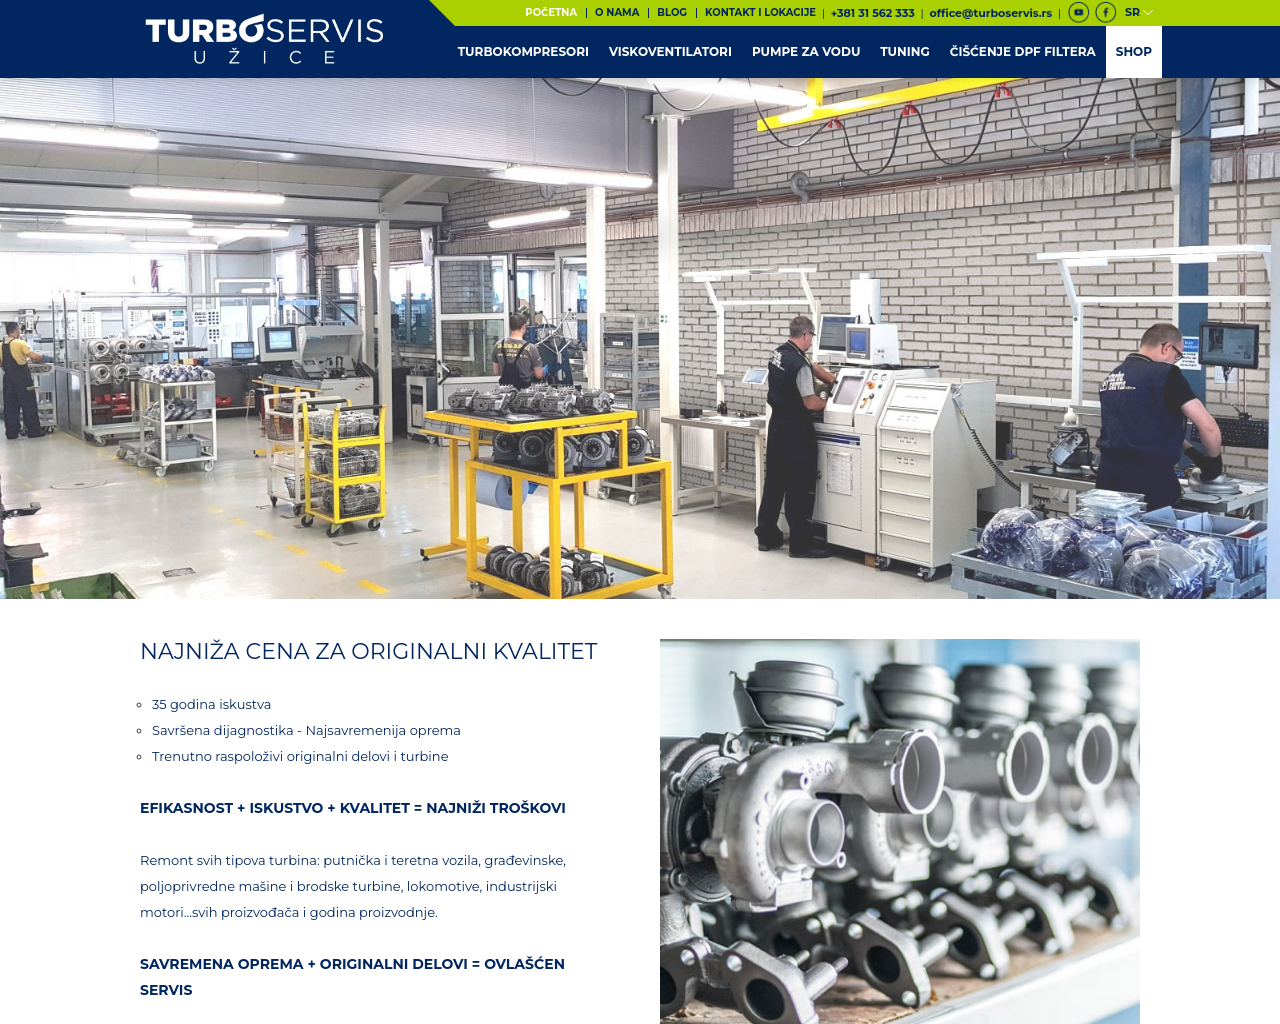 turboservis.rs